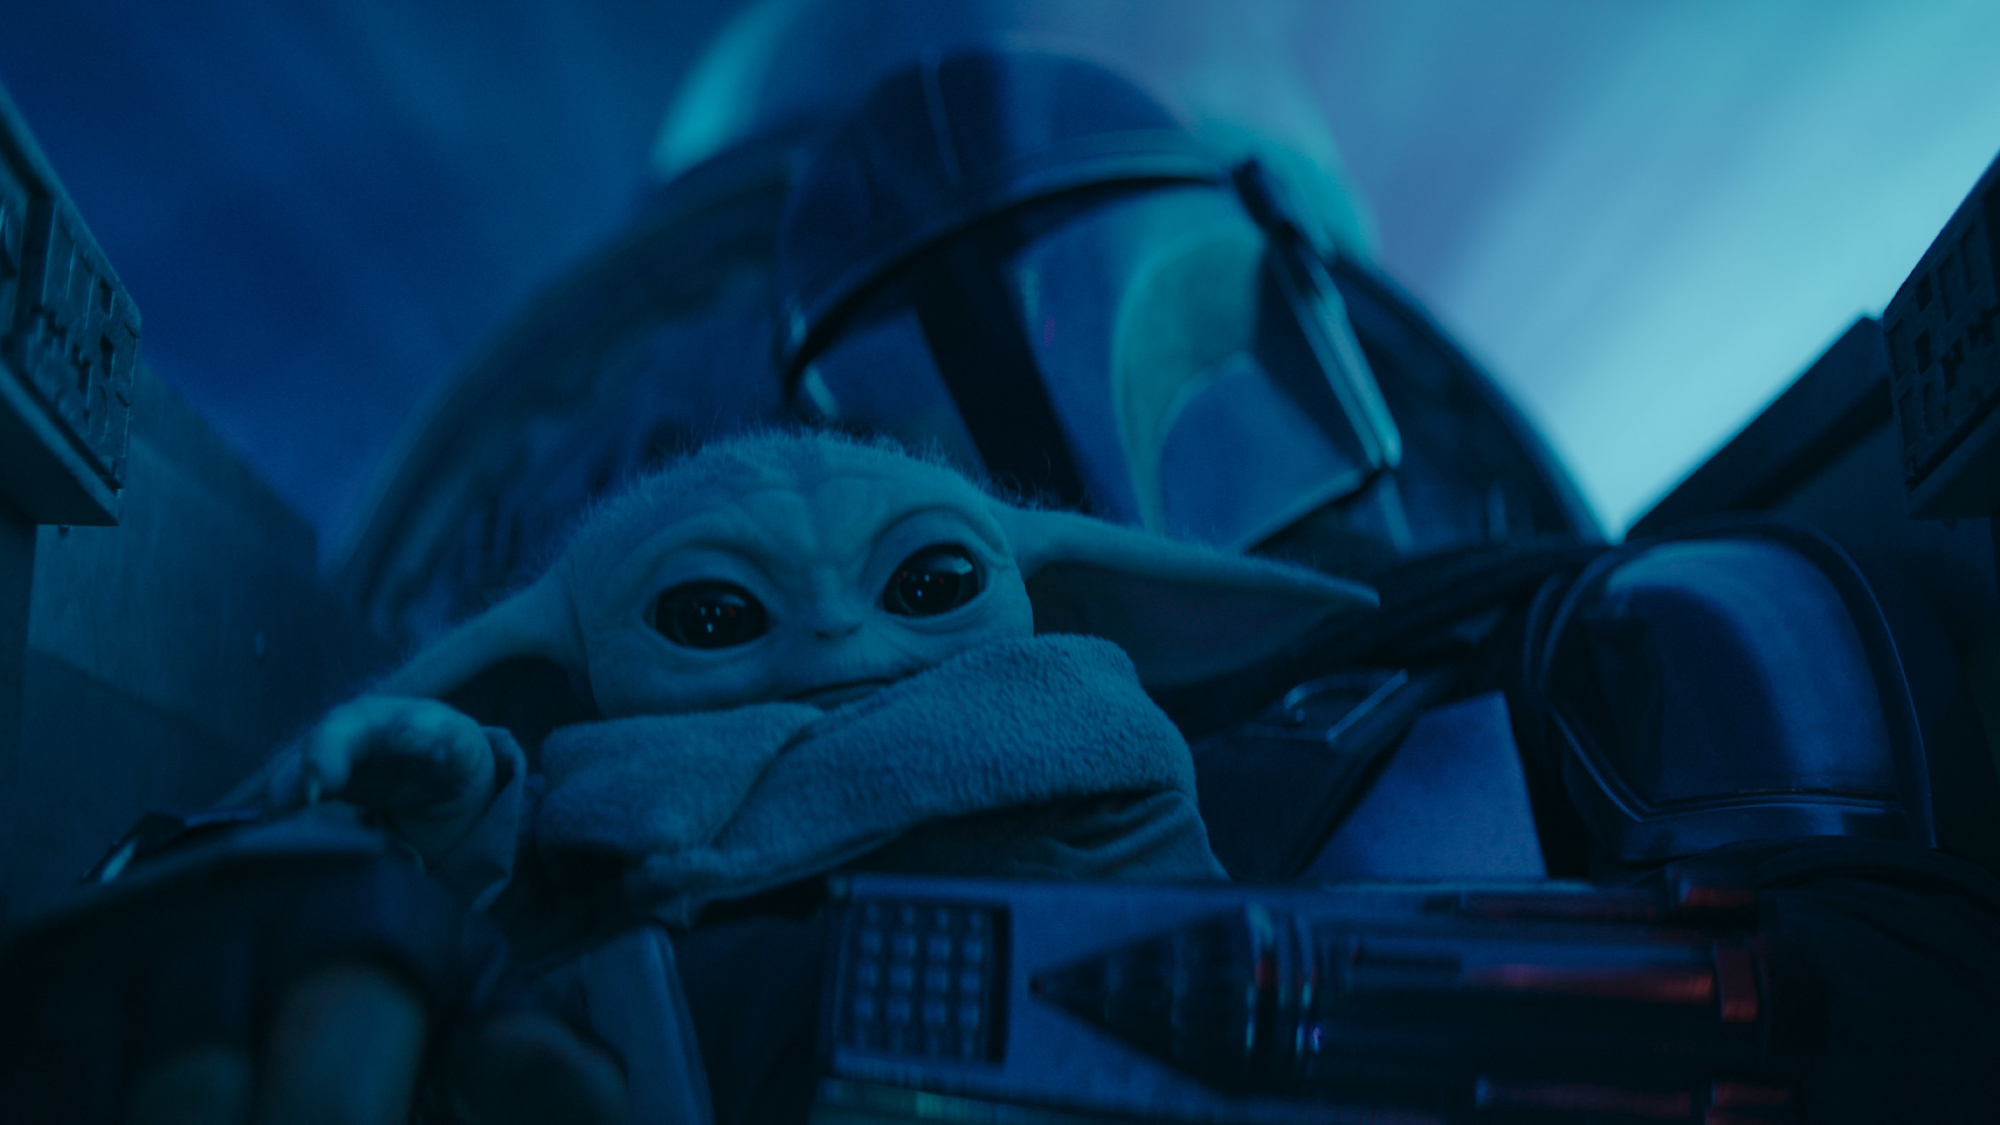 Din Djarin (the Mandalorian) in his spaceship with Grogu (baby Yoda) on his lap, traveling through hyperspace.